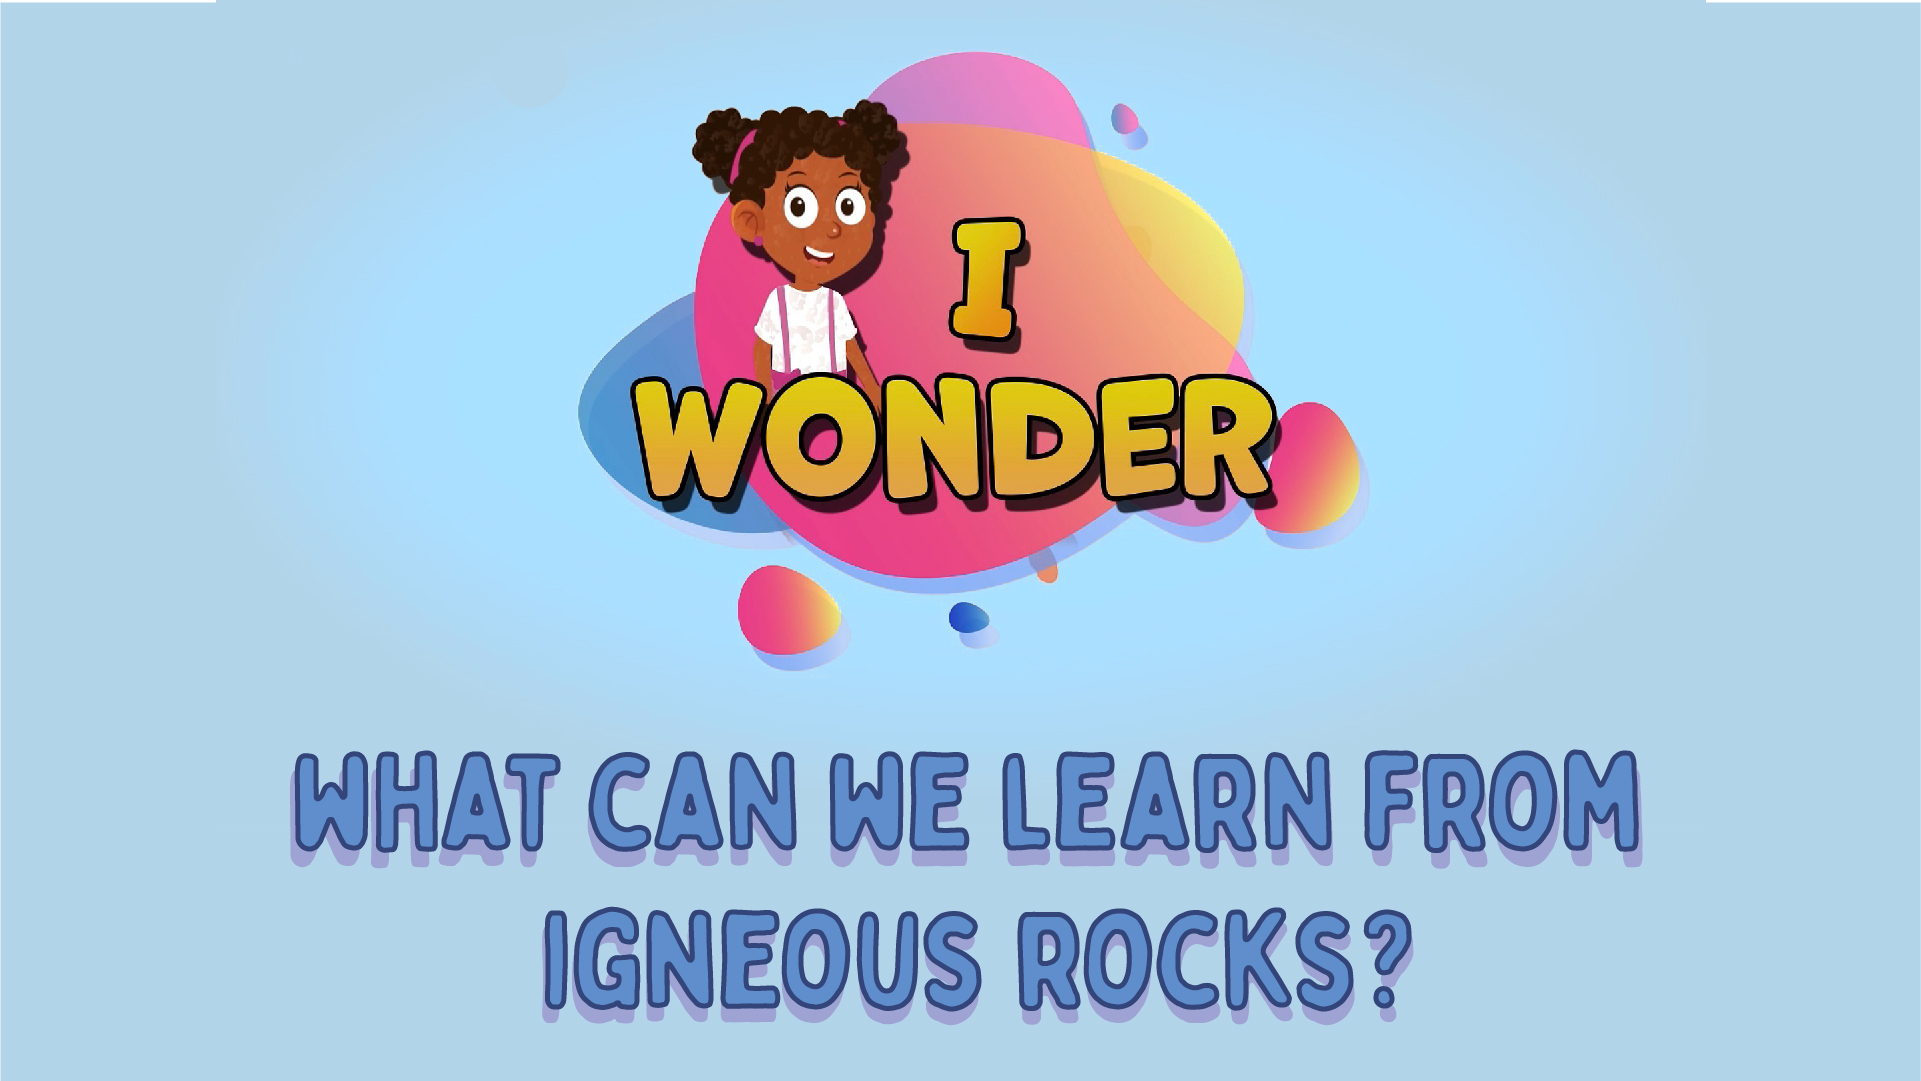 What Can We Learn From Igneous Rocks?